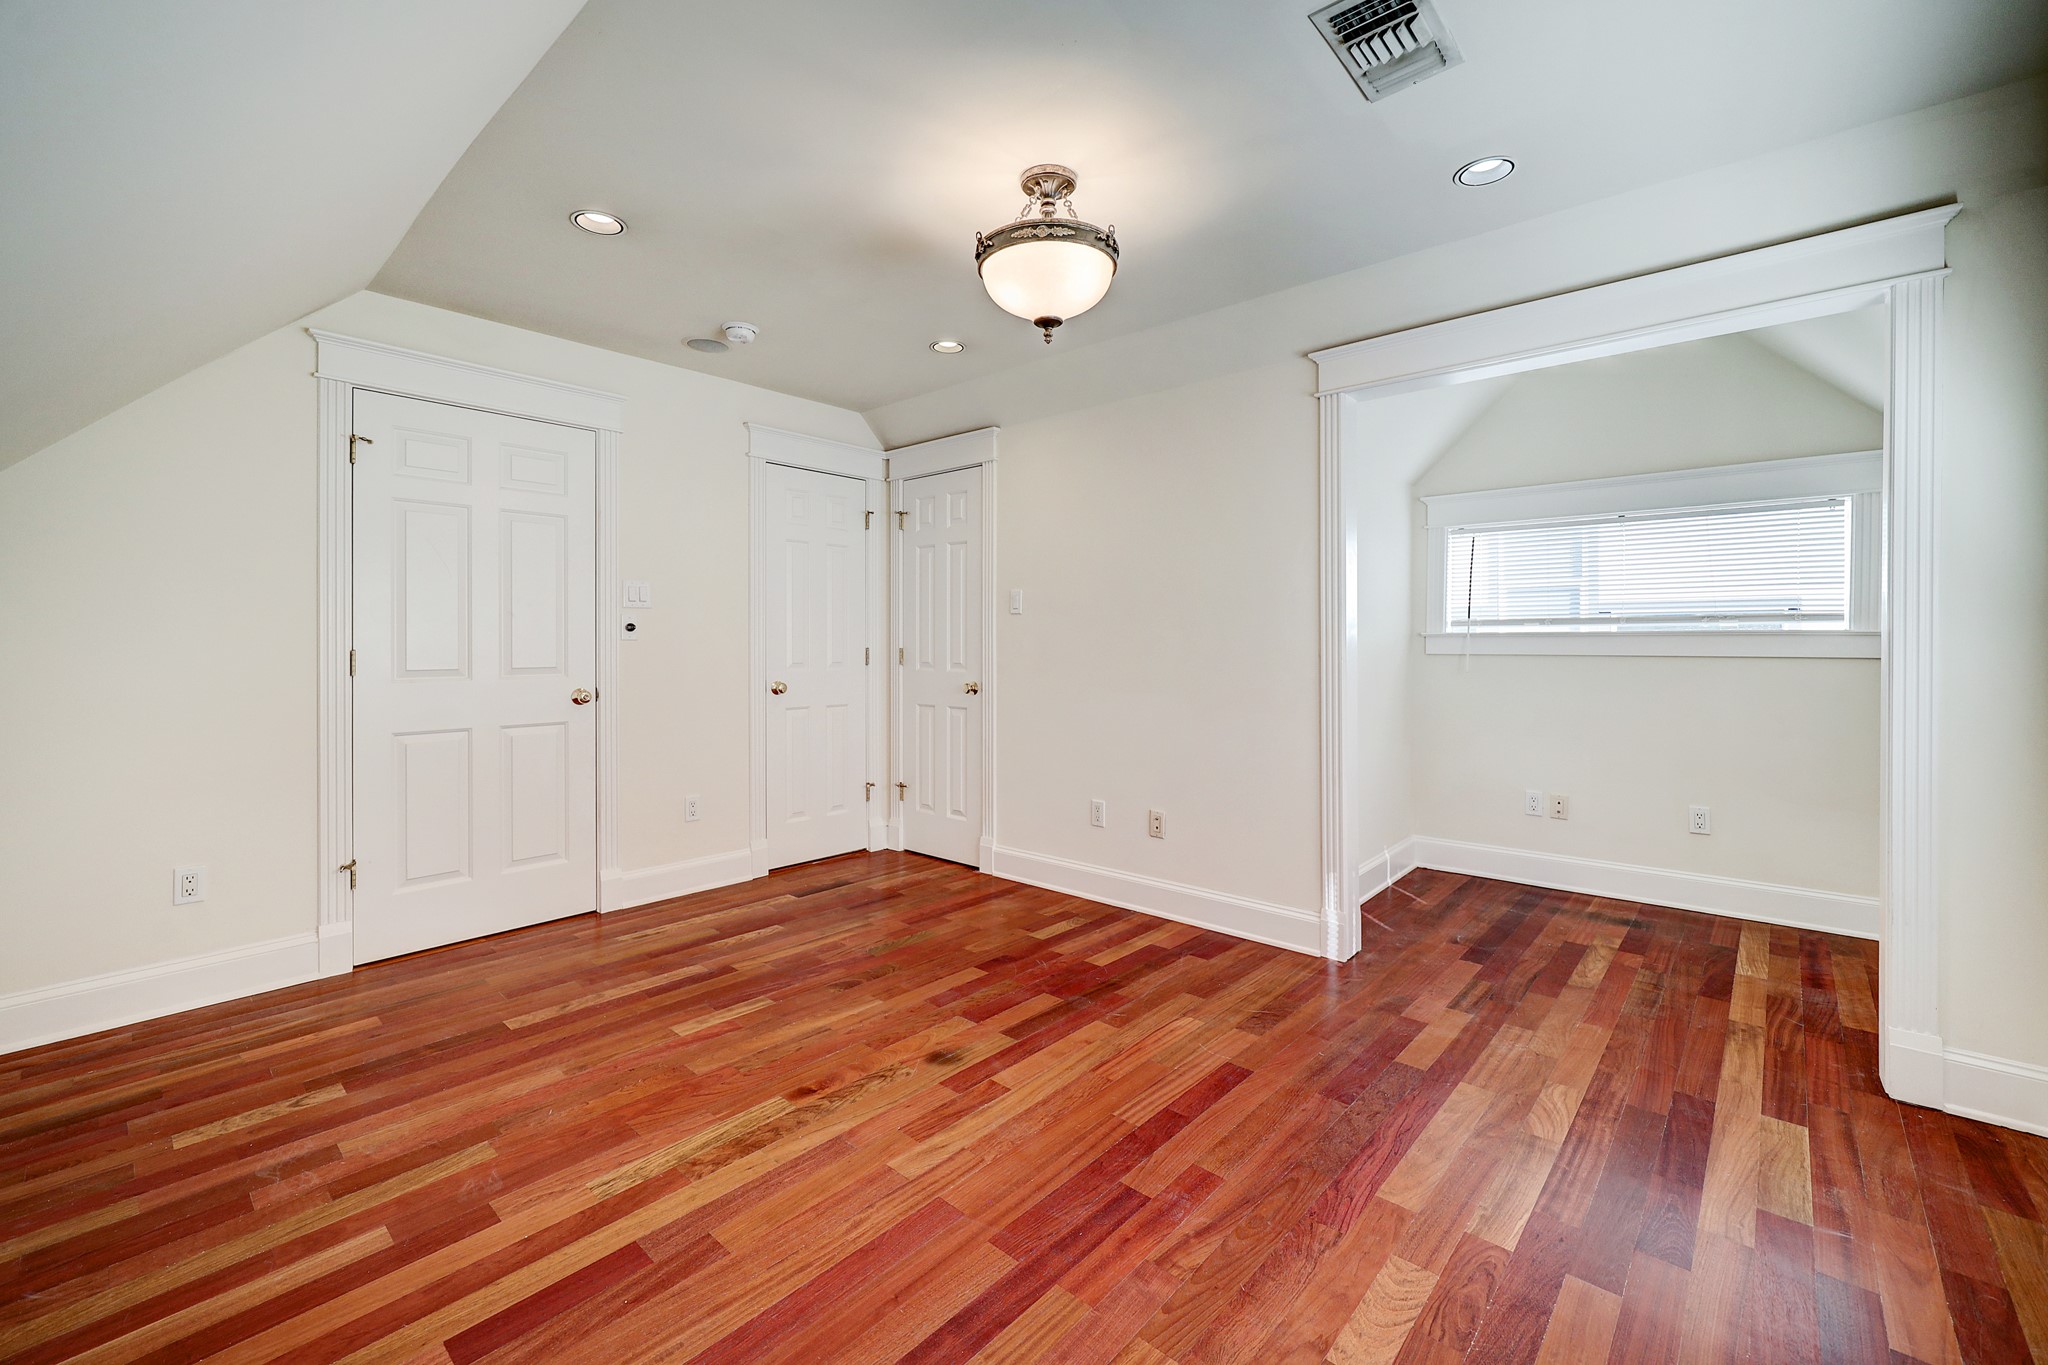 Located on the second floor, the first of the two secondary bedrooms offers large windows that allow natural light to stream in, hardwood flooring, and ample closet space.